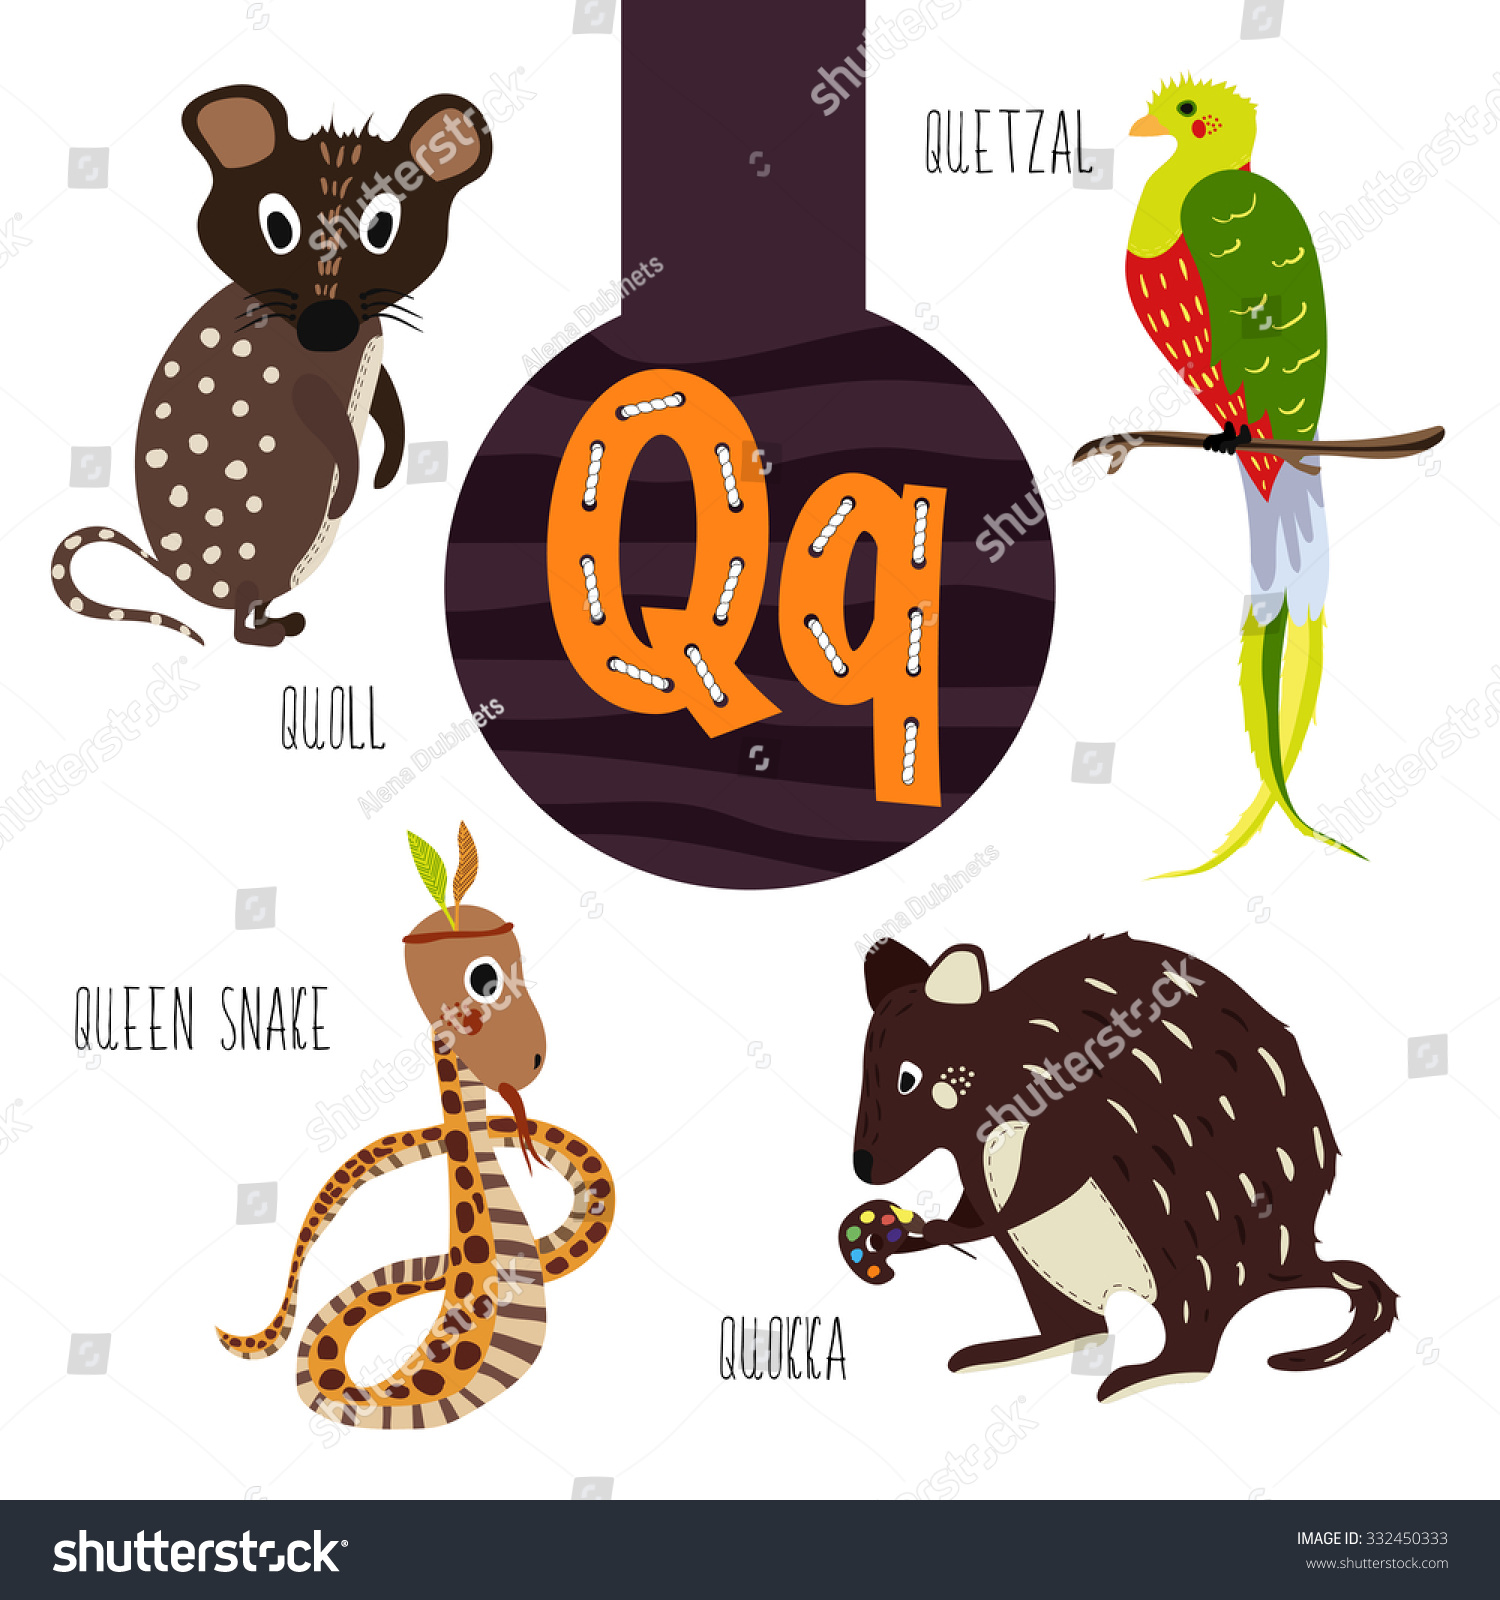 Fun Animal Letters Of The Alphabet For The Development And Learning Of